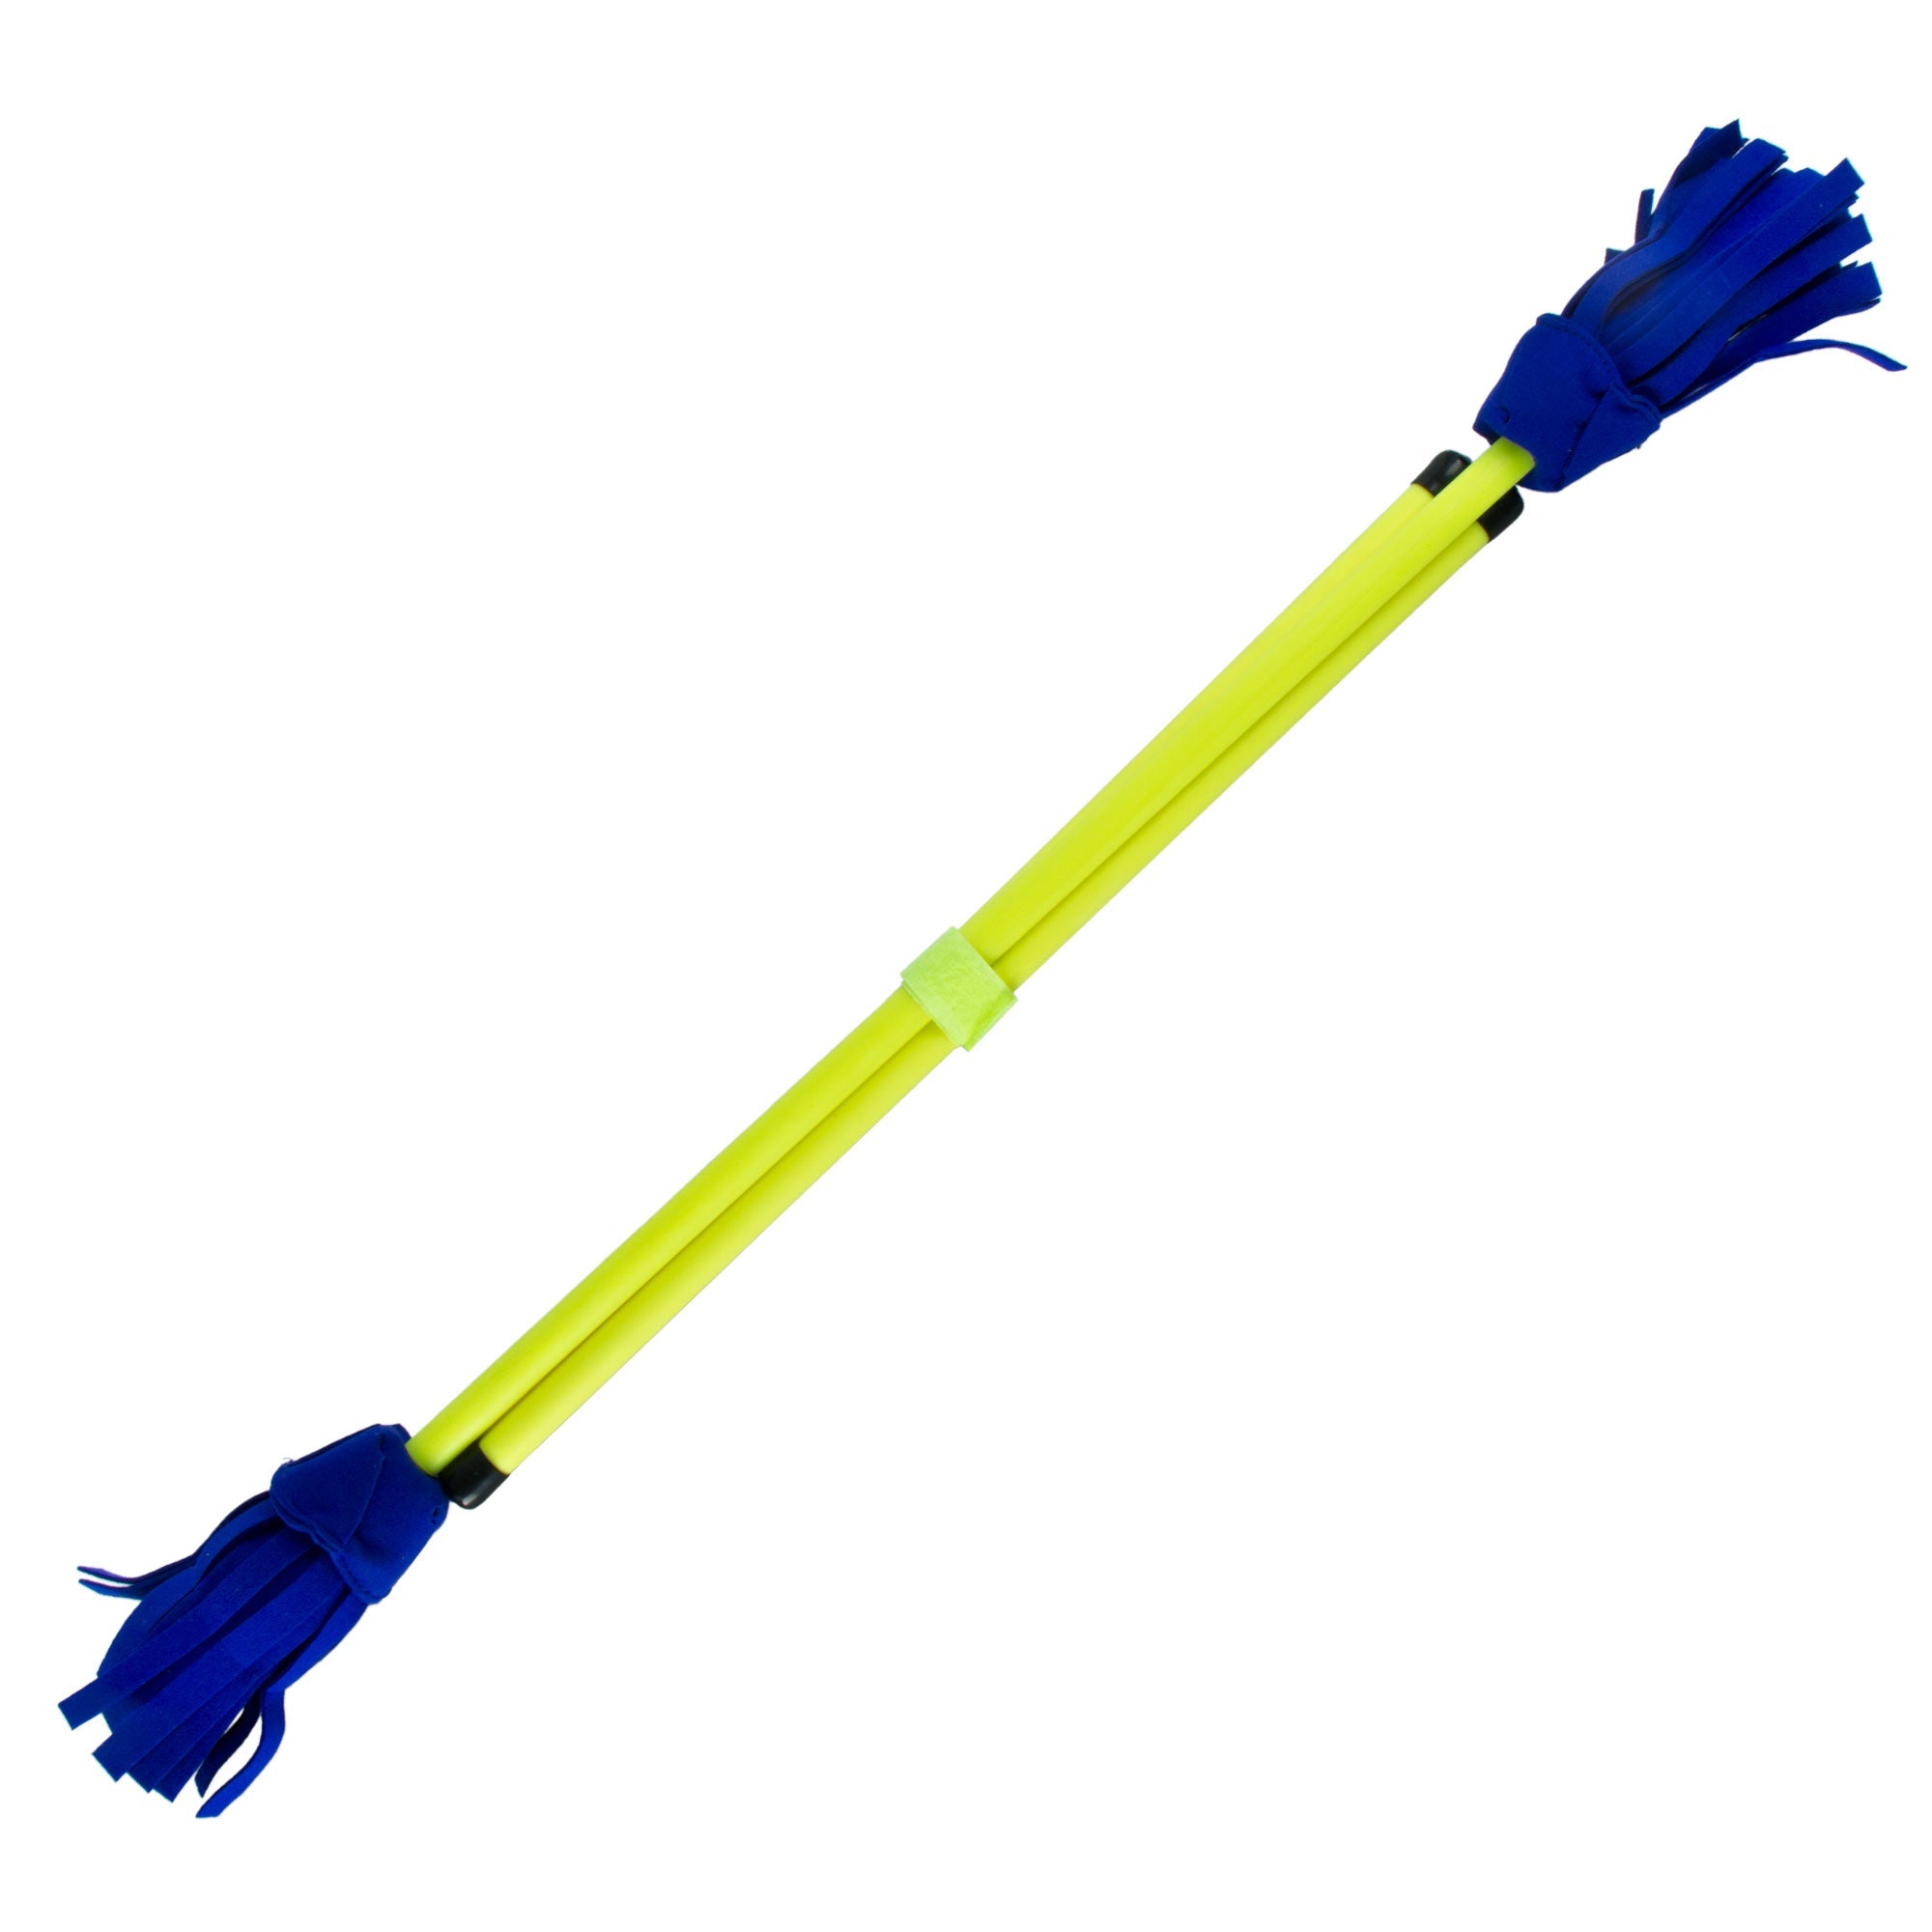 yellow neo flower stick and hand sticks strapped together